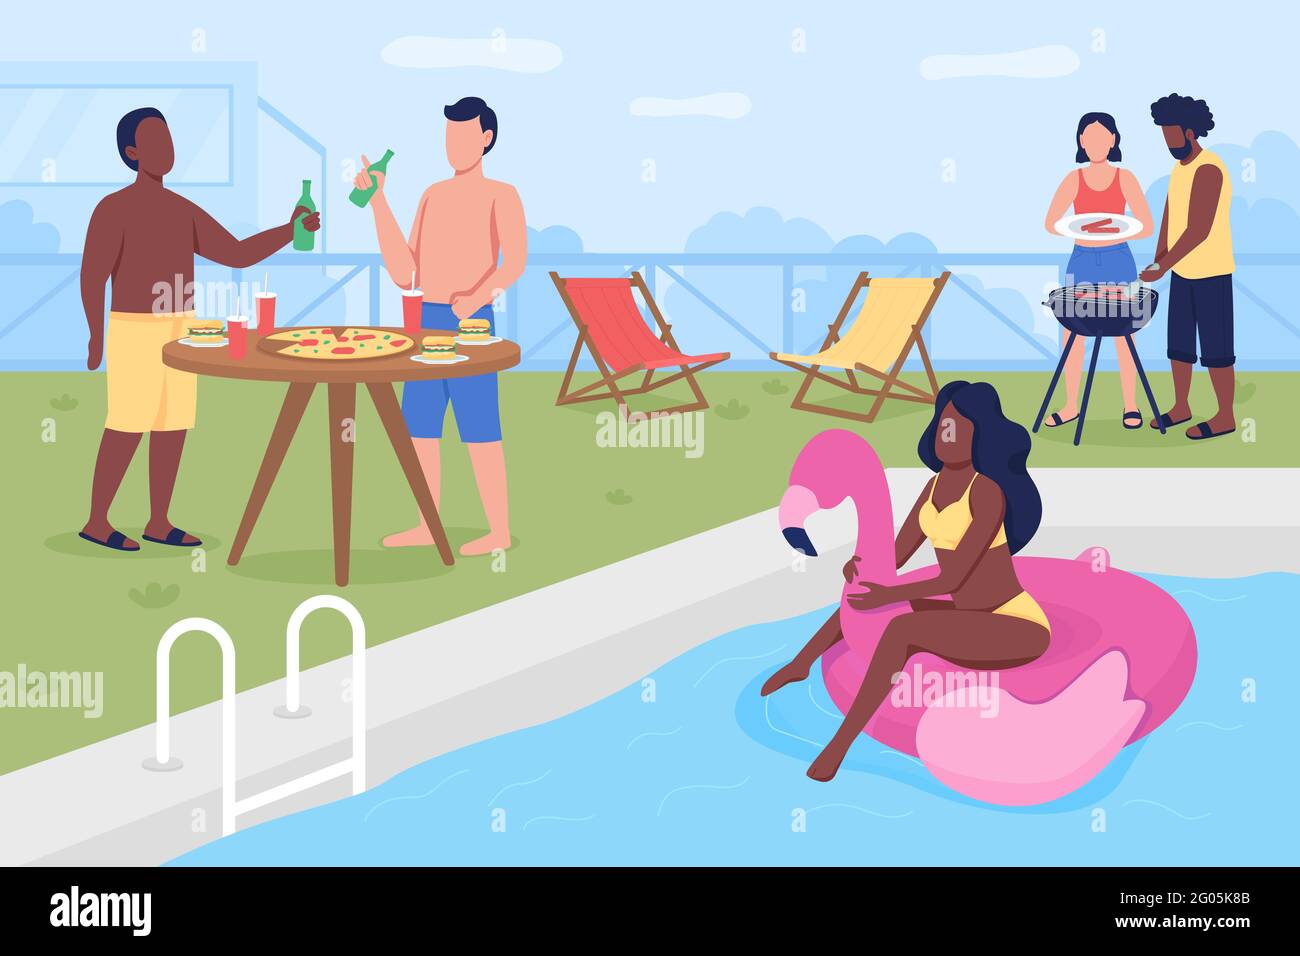 Pool Party Graphic Stock Illustrations – 4,056 Pool Party Graphic Stock  Illustrations, Vectors & Clipart - Dreamstime